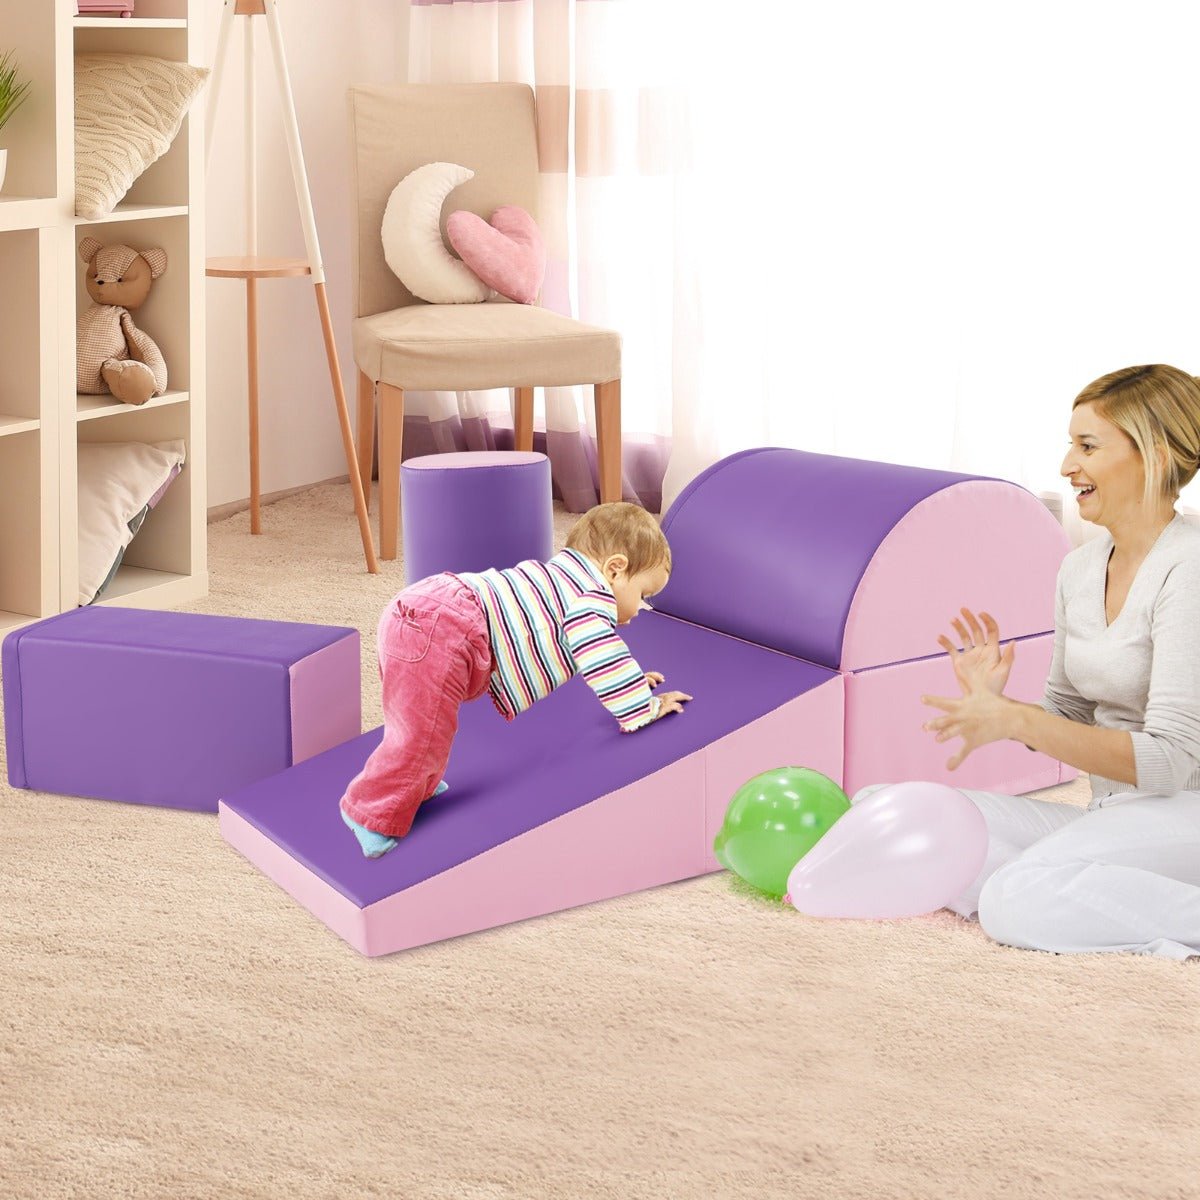 Adventure Awaits with Our Pink Purple Foam Shapes Playset